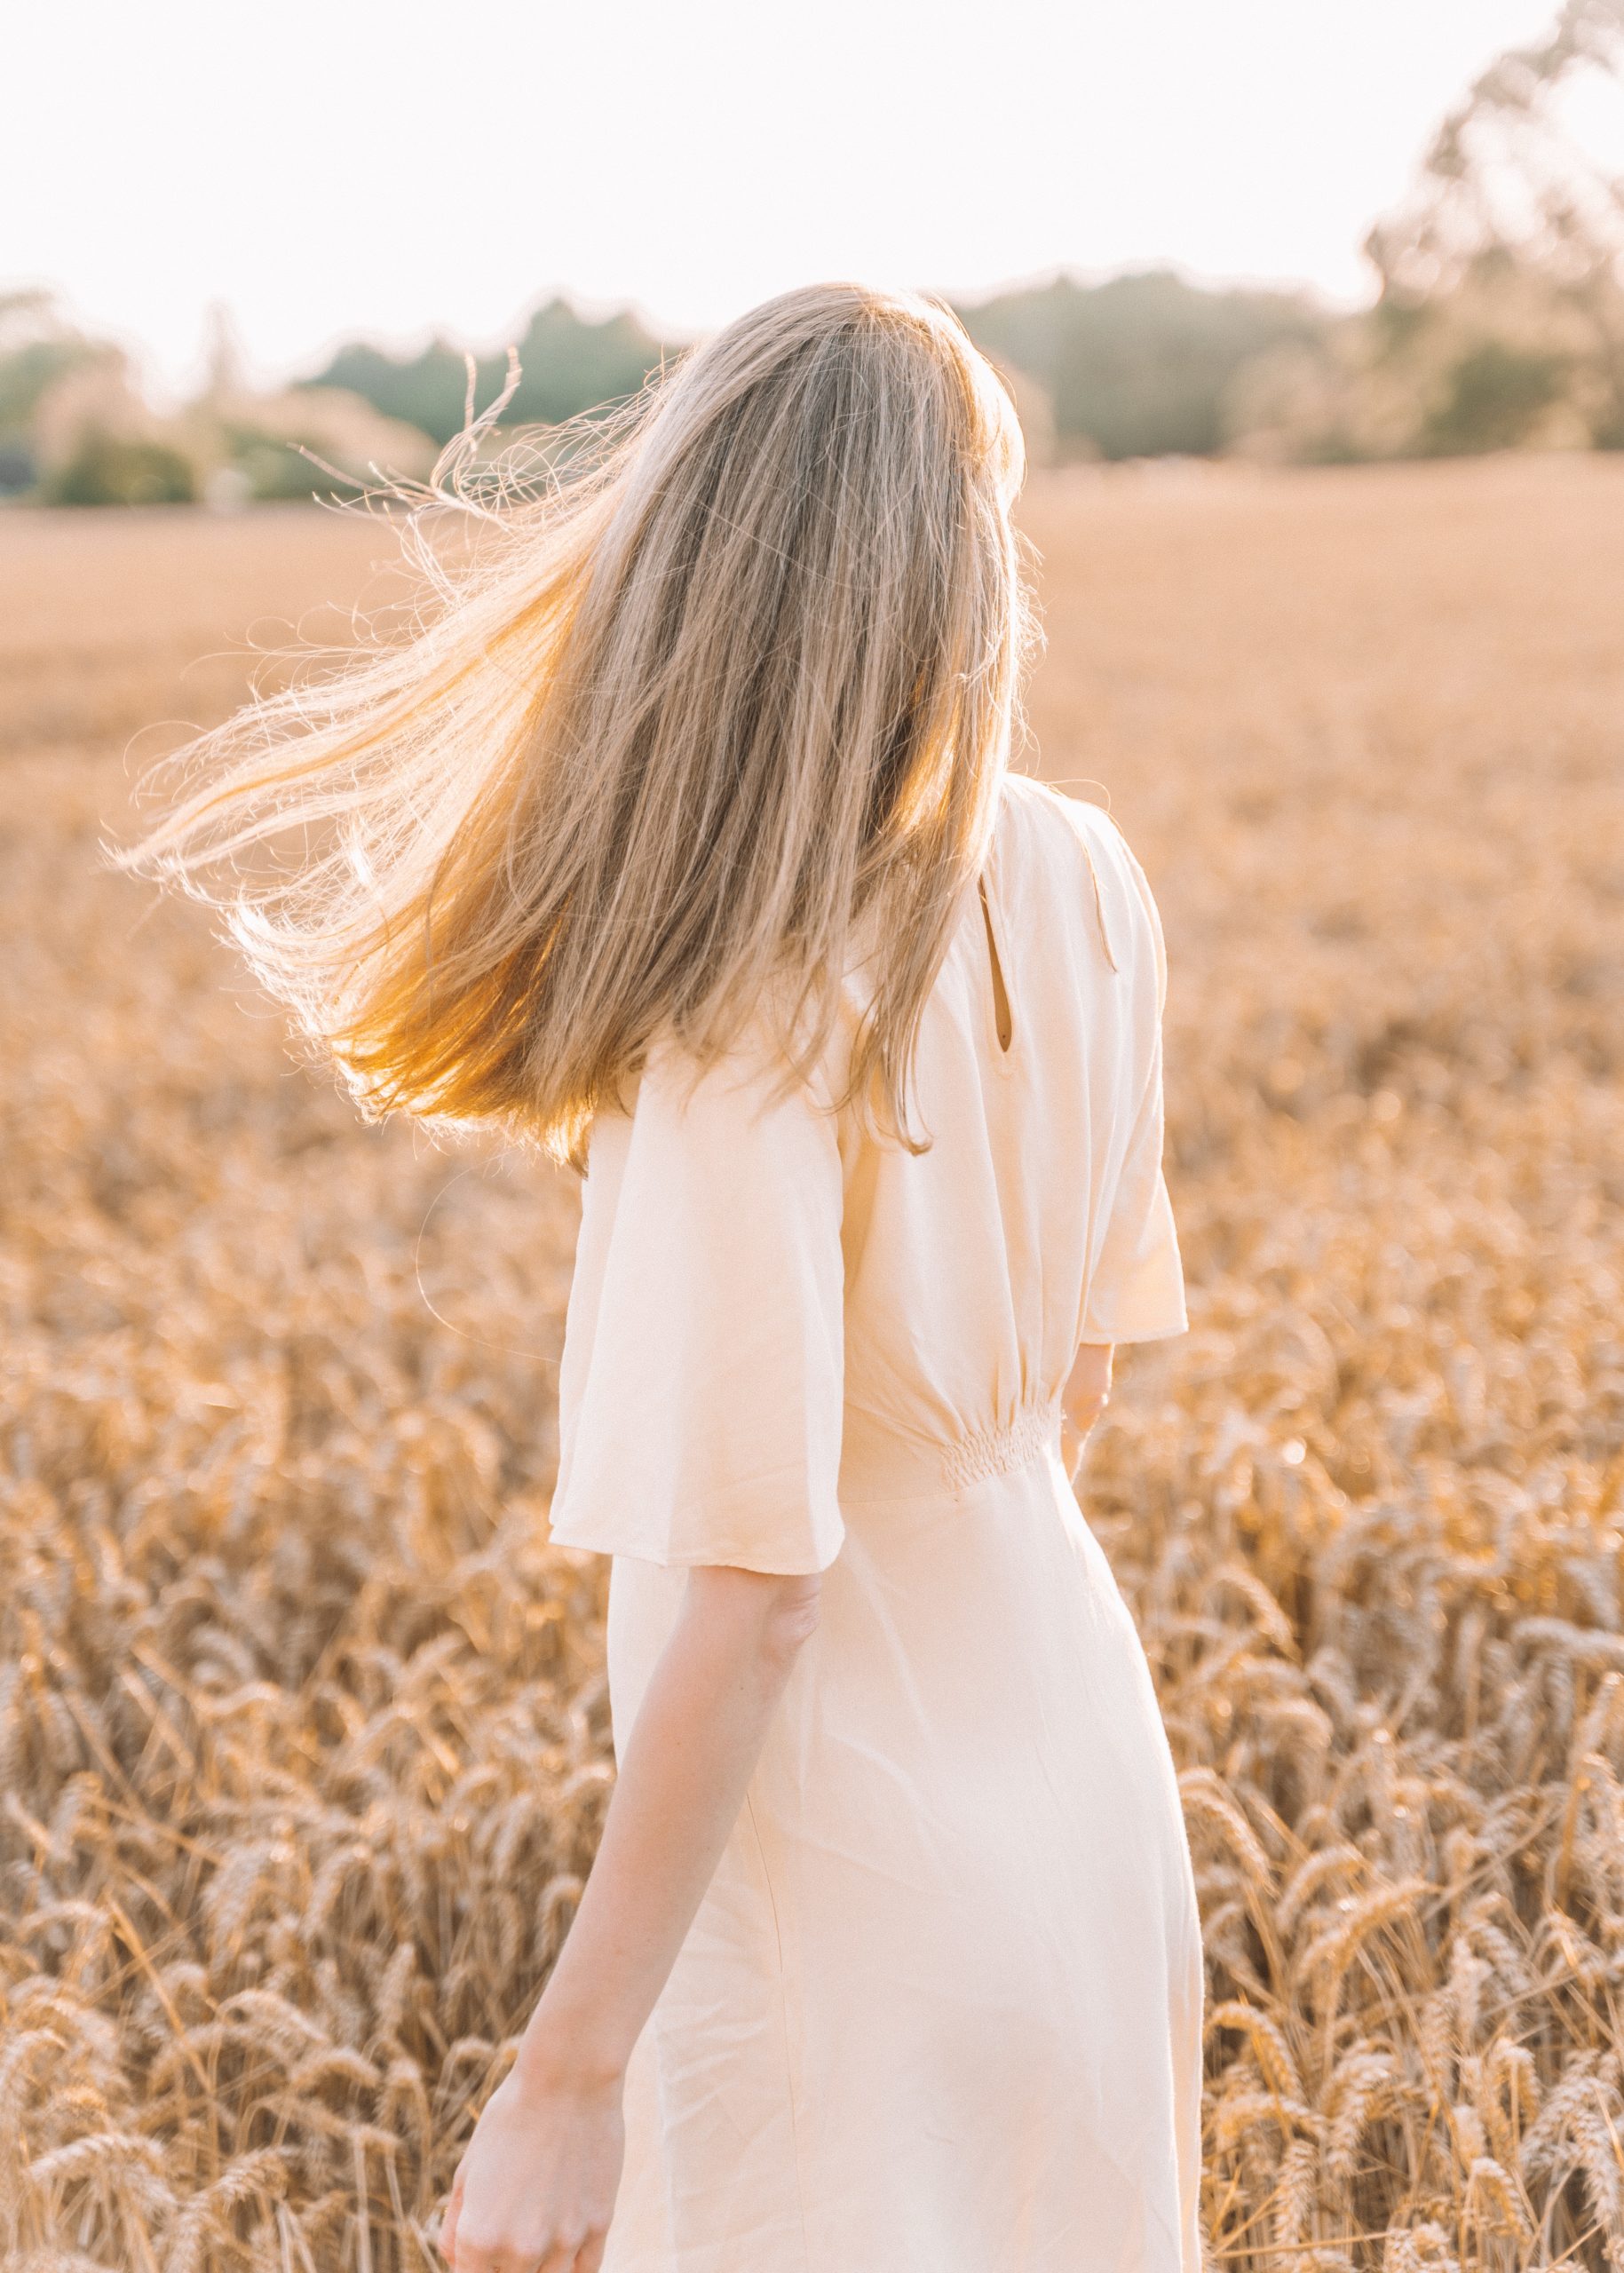 A client who has recovered from her eating disorder, standing and reflecting in a field. Sharing insights on how to support a loved one through recovery.